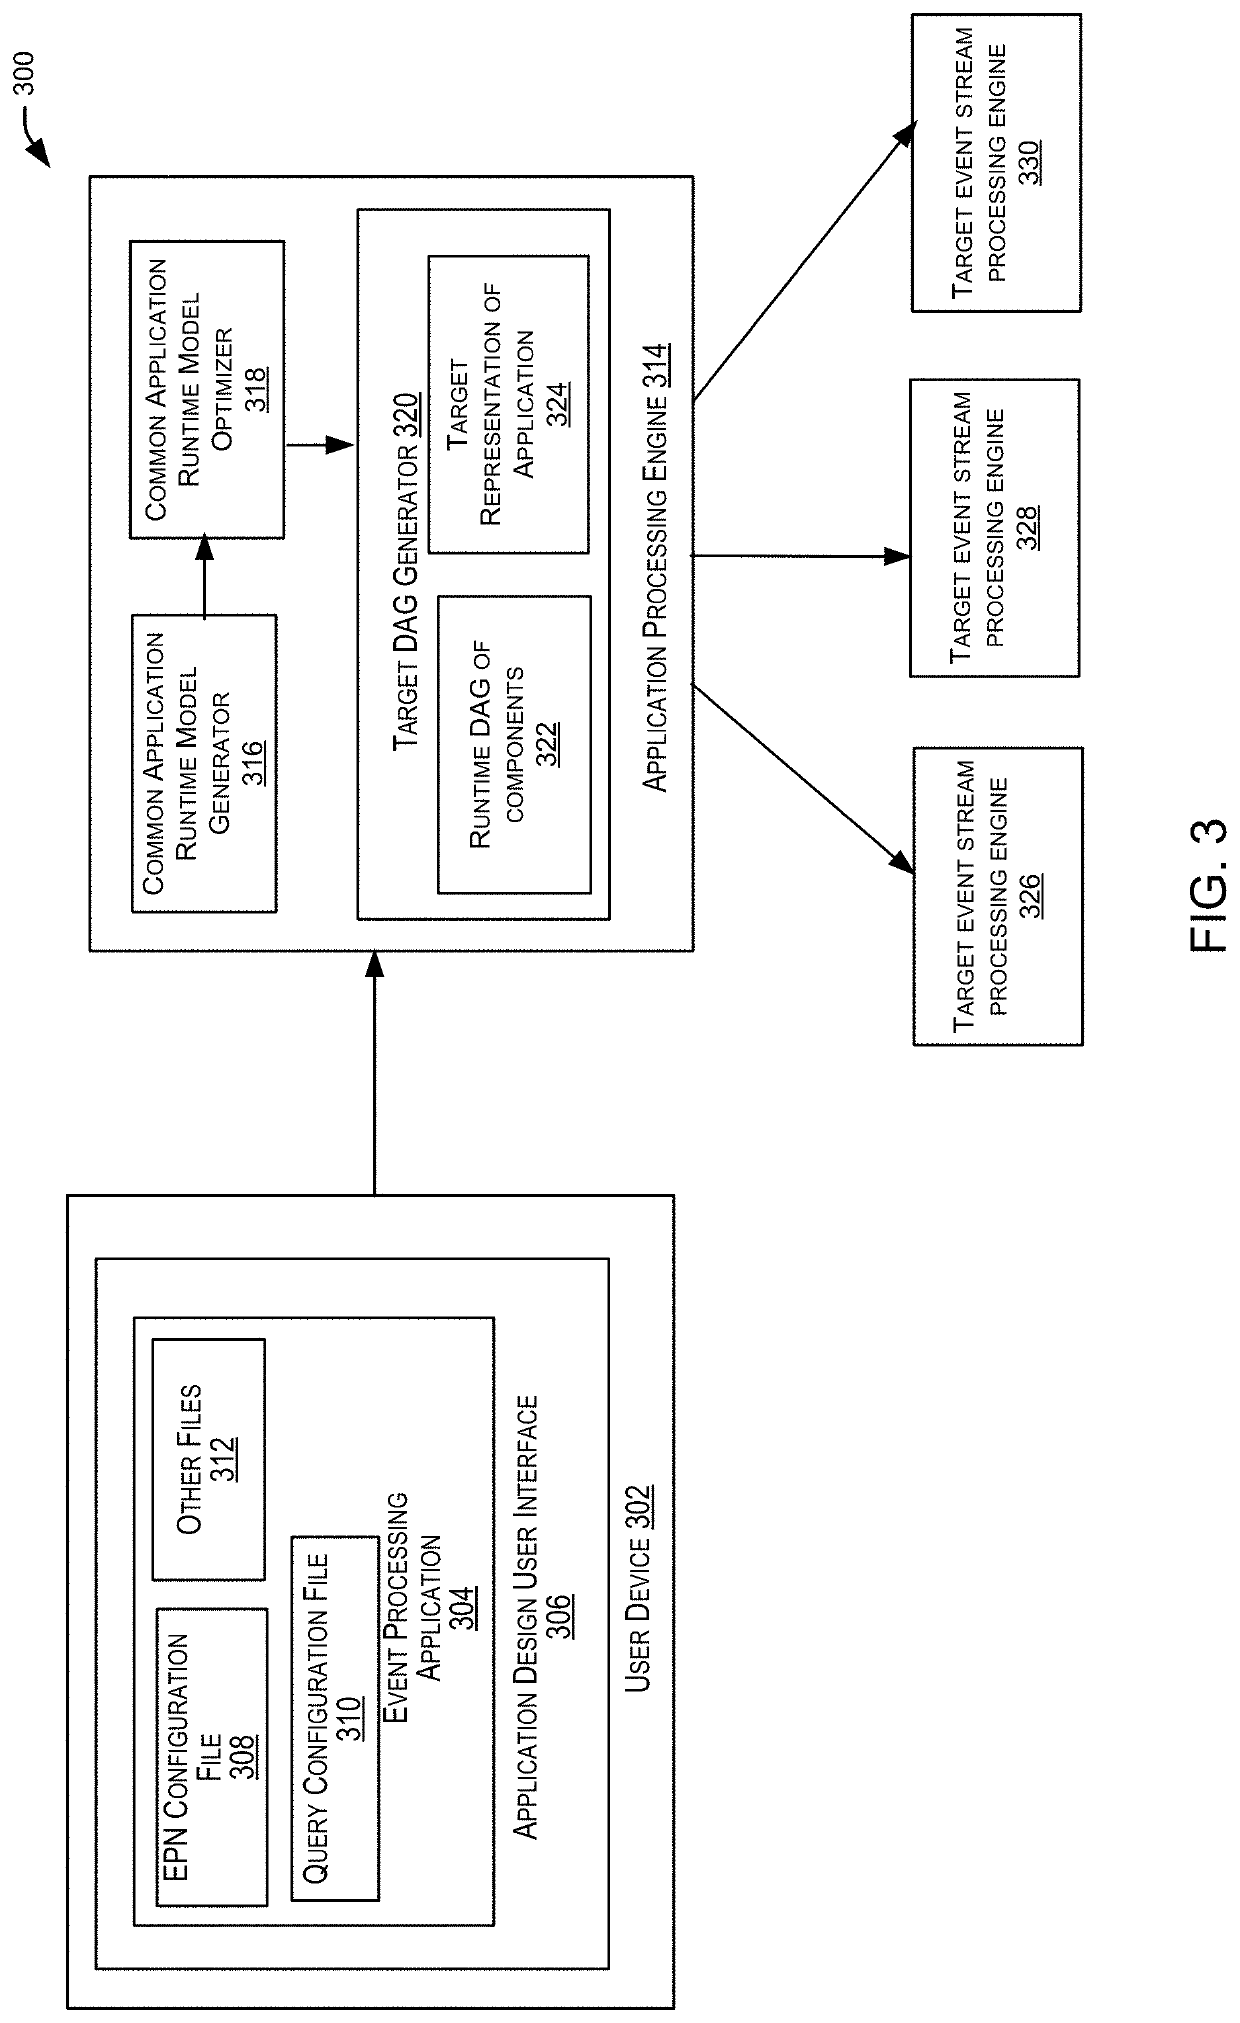 Graph generation for a distributed event processing system